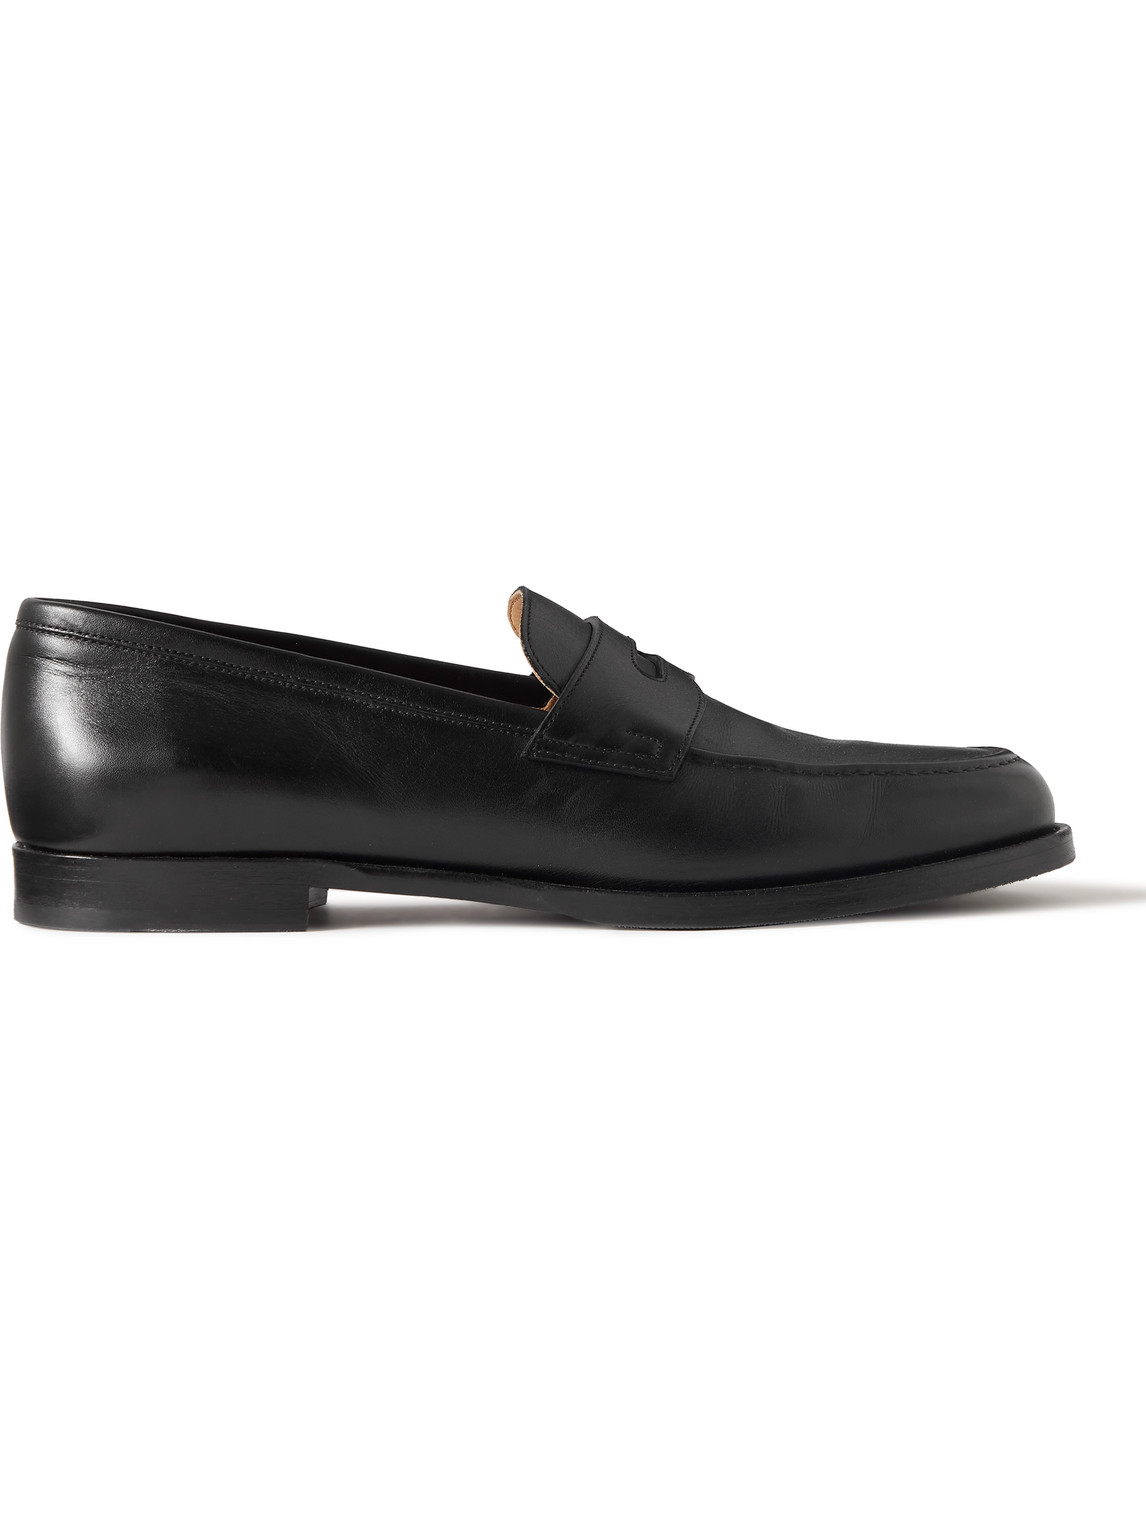 DUNHILL AUDLEY LEATHER PENNY LOAFERS